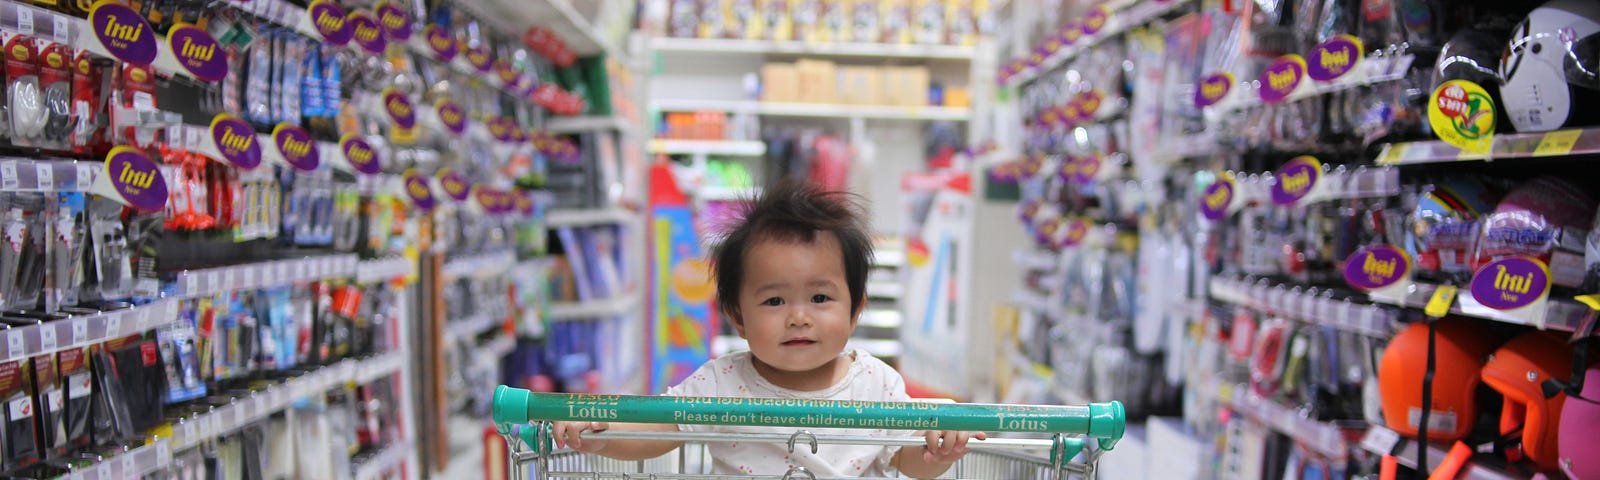 A baby sitting in an empty shopping trolley in an aisle of a department store with shelves full of colourful items.